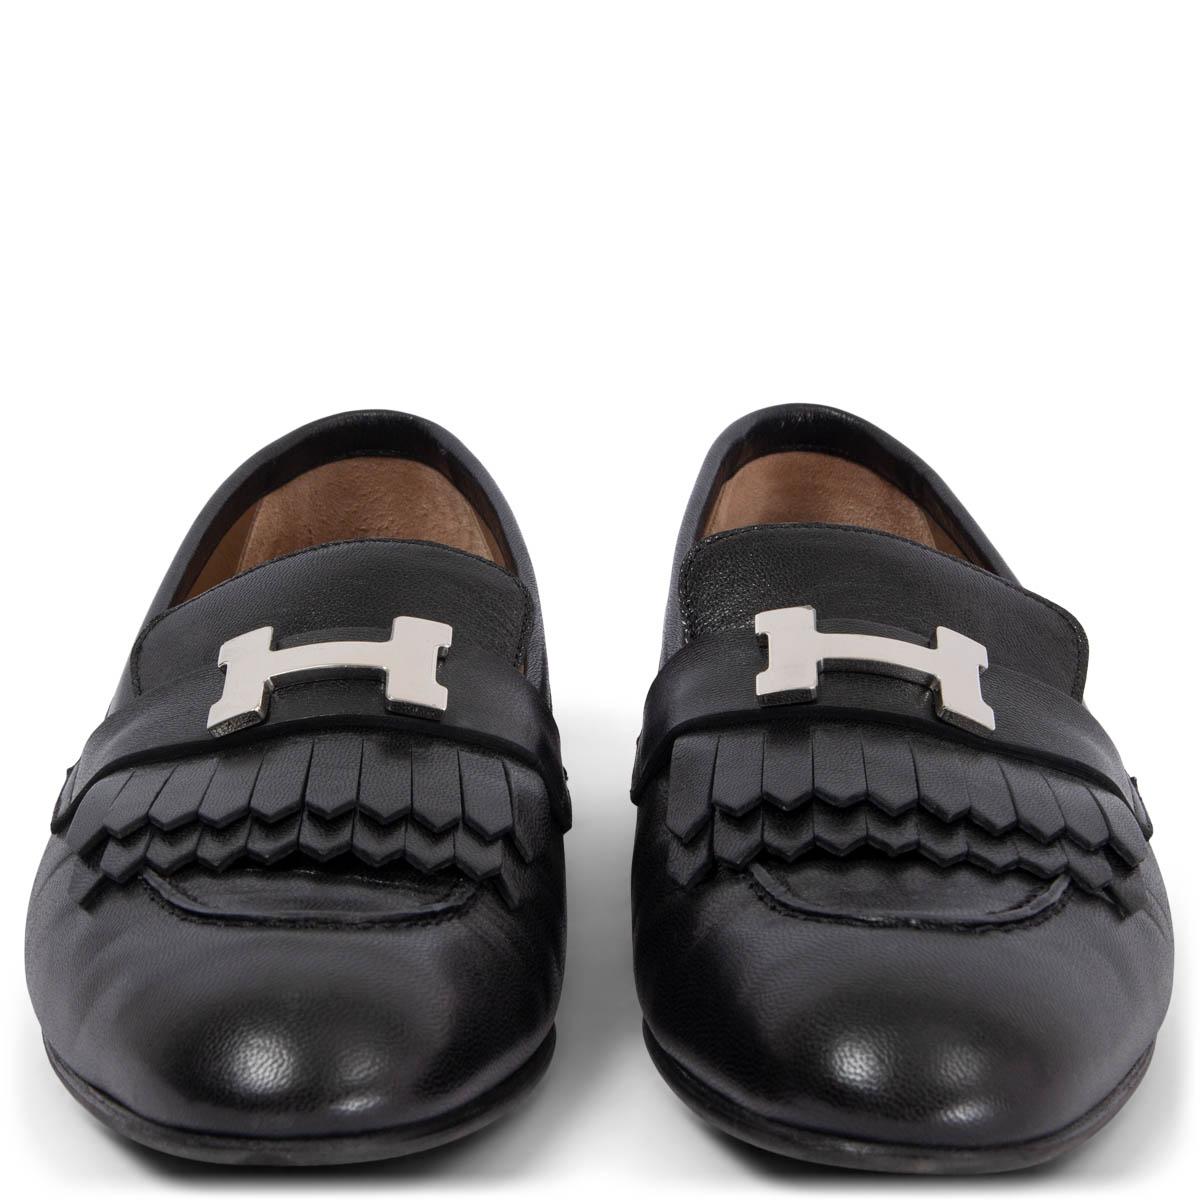 100% authentic Hermès Royal loafers in black smooth goat skin embellished with fringes and signature Palladium Constance-H buckle. Have been worn and are in excellent condition. 

Measurements
Imprinted Size	38.5
Shoe Size	38.5
Inside Sole	25.5cm